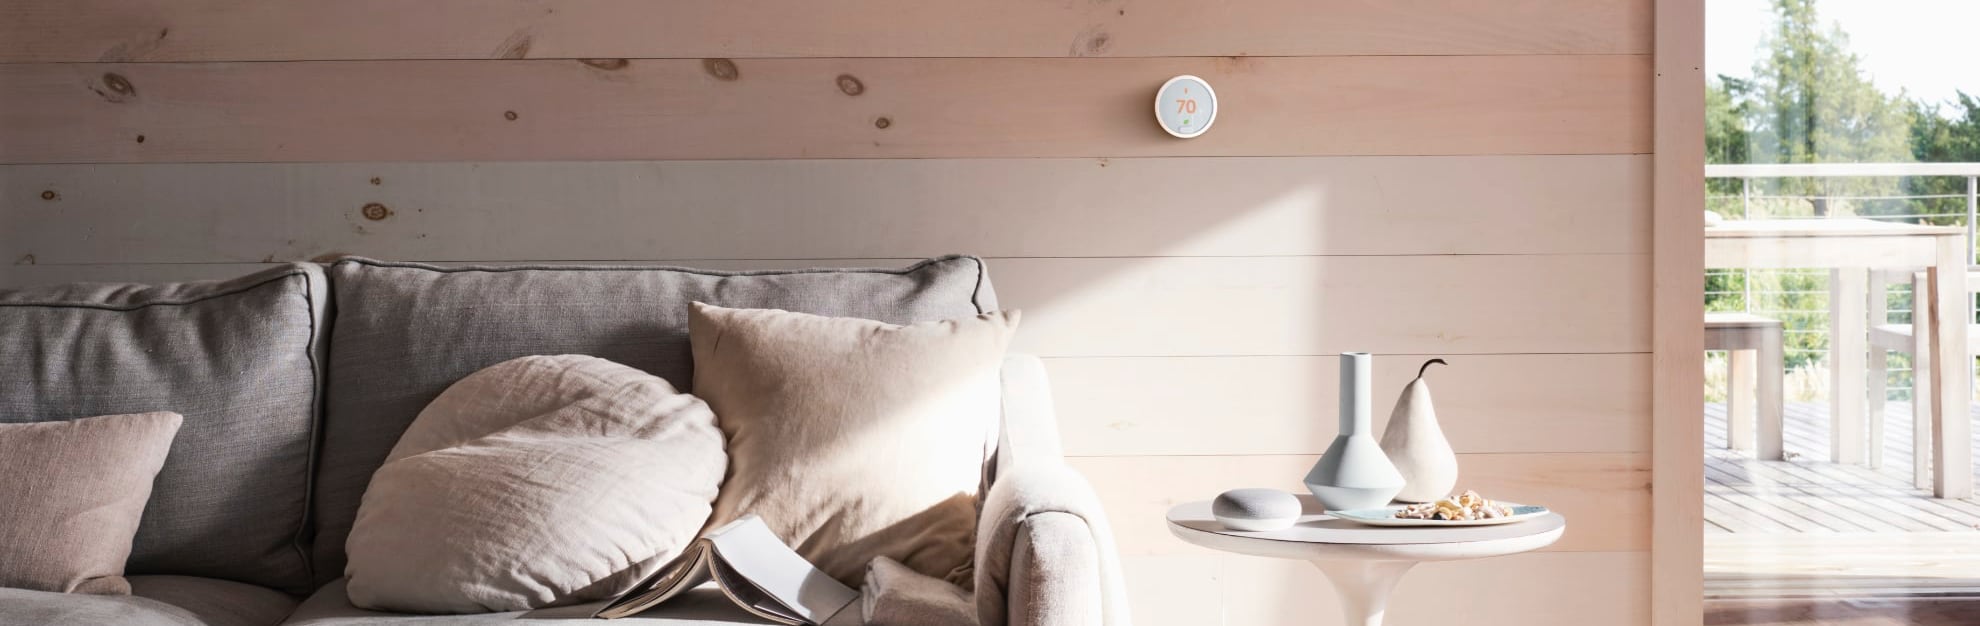 Vivint Home Automation in Oceanside